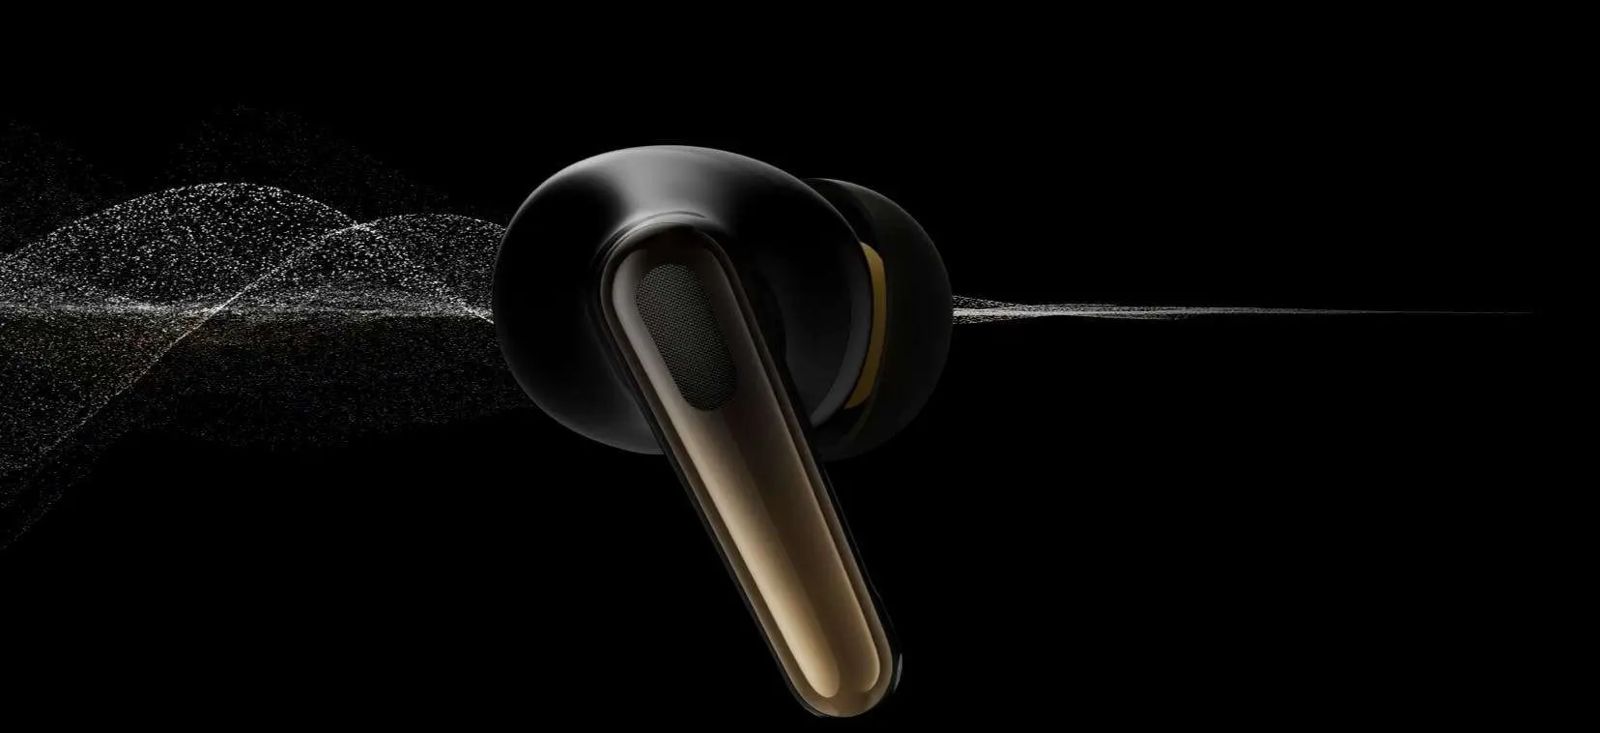 TWS 2 earbuds priced at approximately $55, offering premium audio at an affordable price